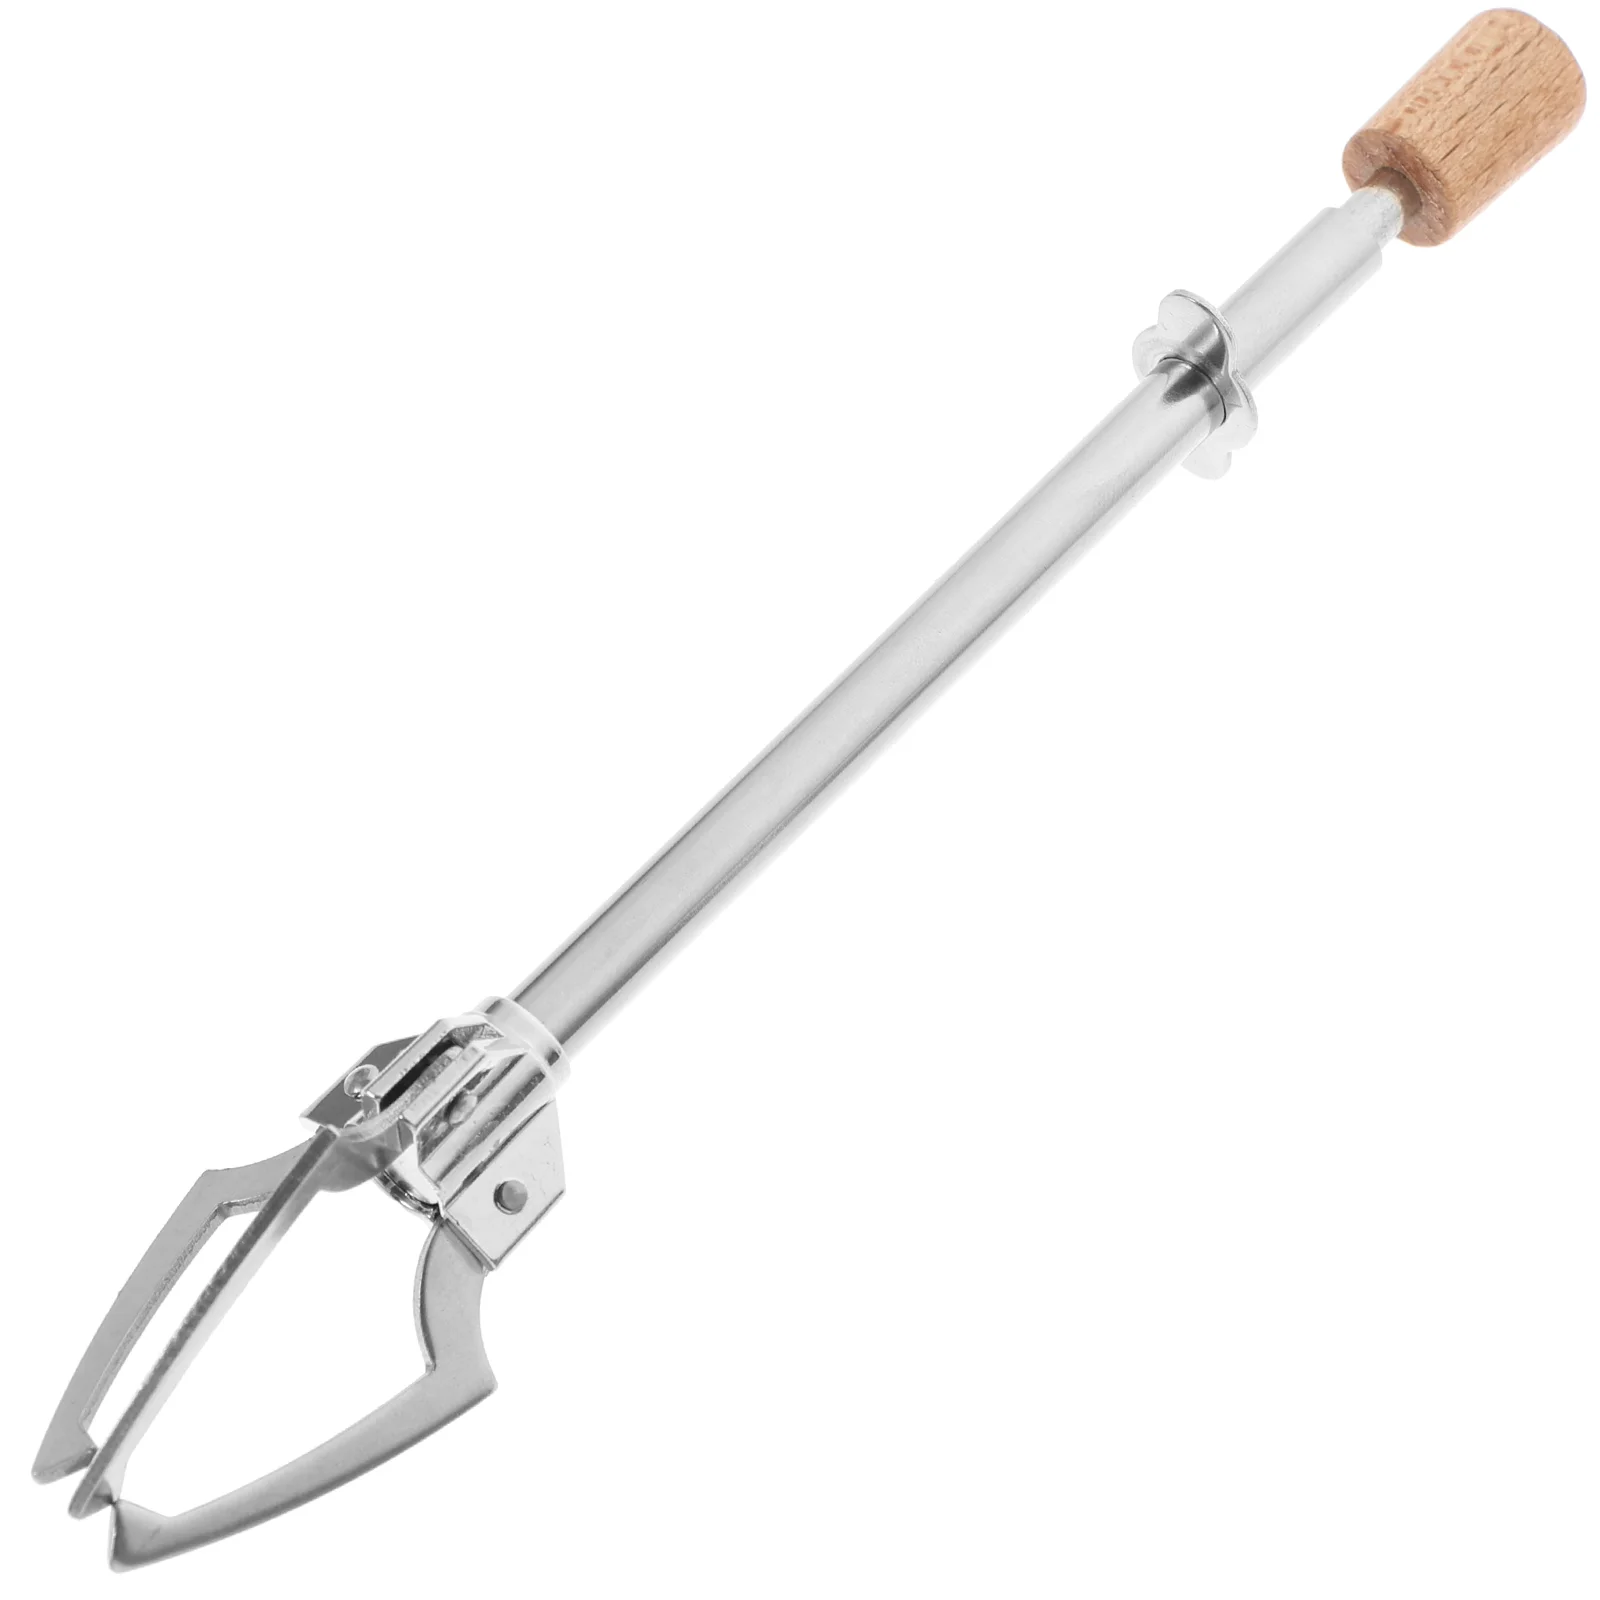 

Tongs Tong Steak Salad Cooking Grilling Clip Appetizer Buffet Server Serving Clamp Ice Grabber Toast Utility Chef Scissor